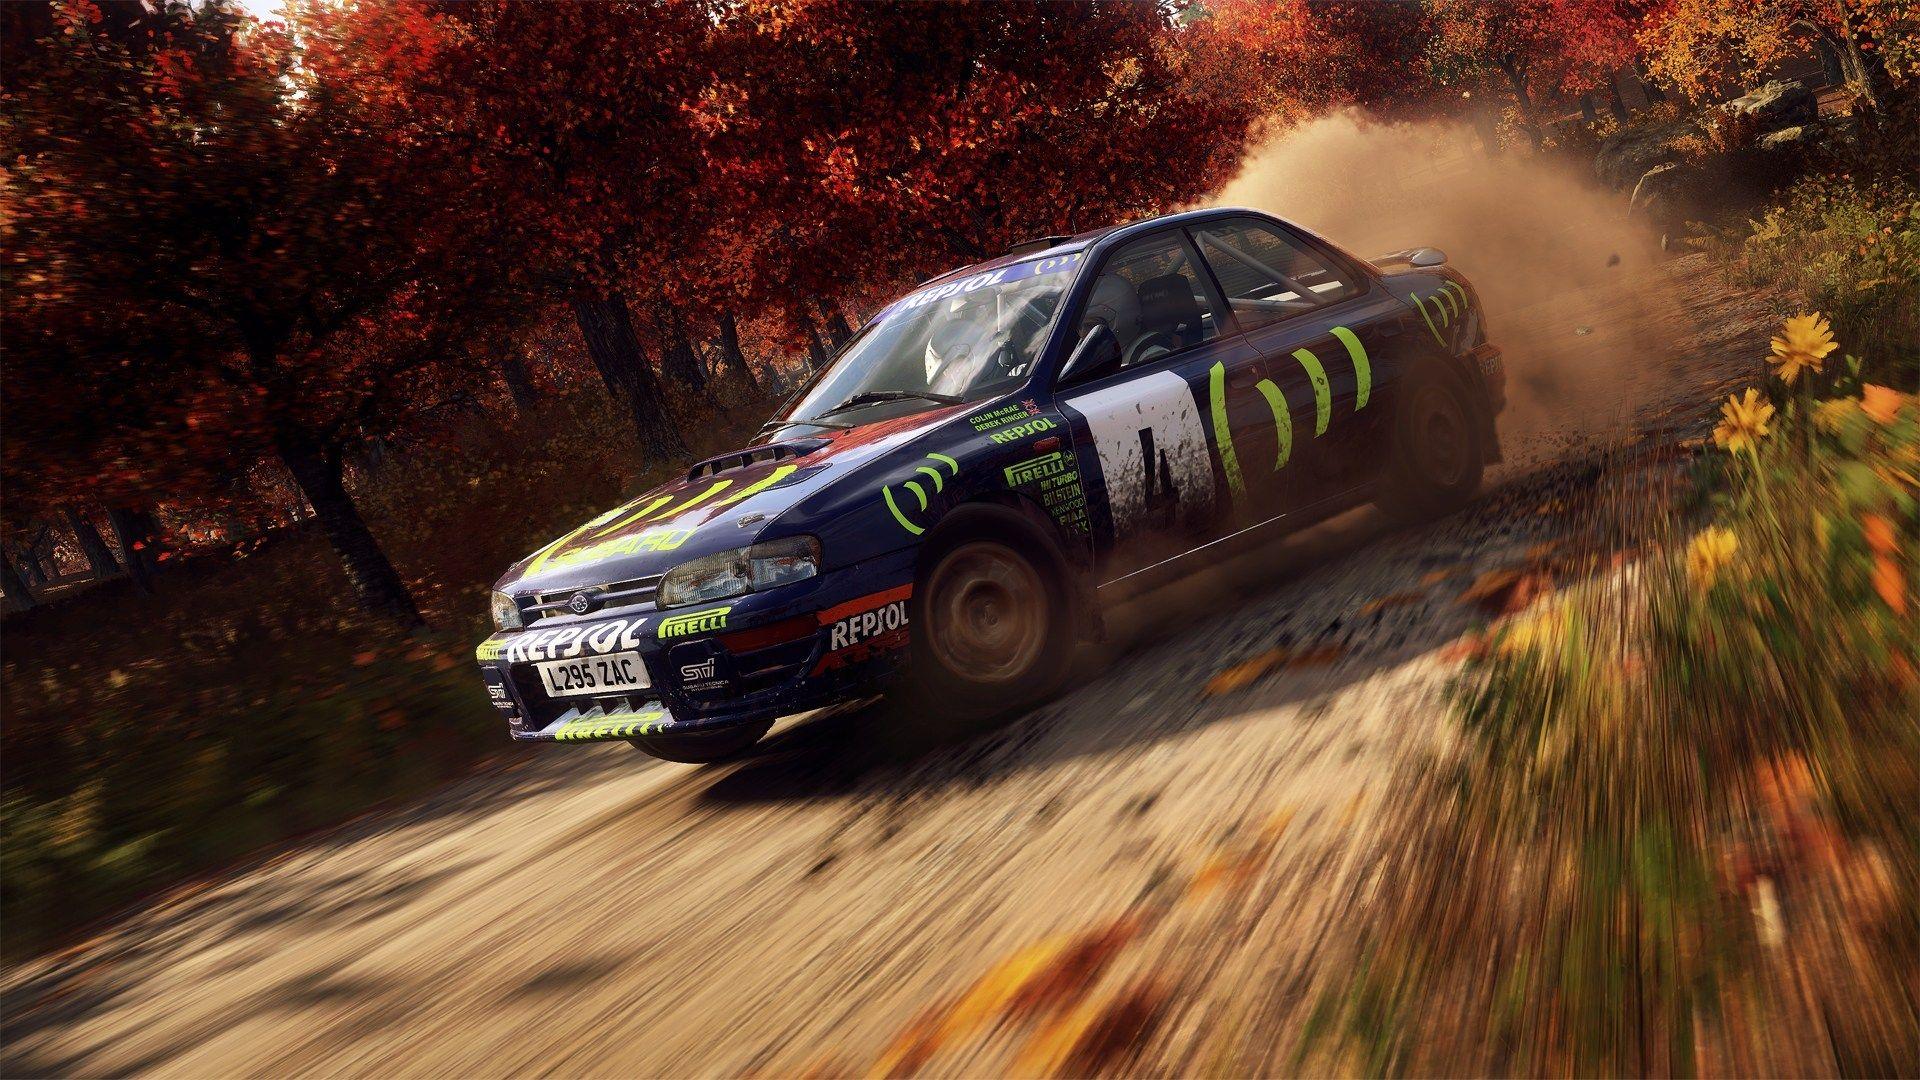 Dirt Rally 2.0 vehicles are a showcase of the the last 50 years